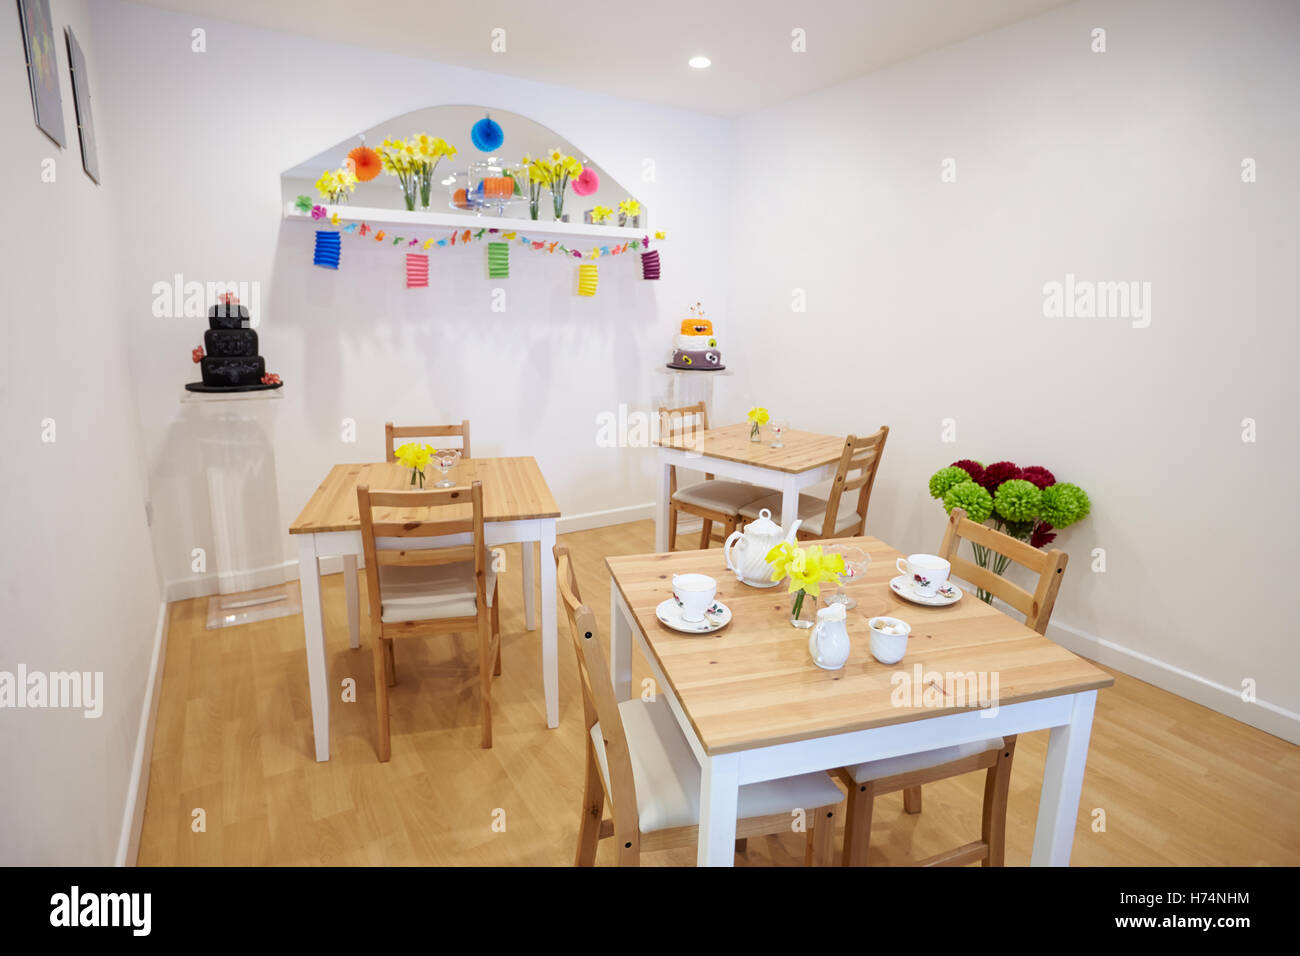 Interior Of Empty Tea Shop With Tables And Crockery Stock Photo